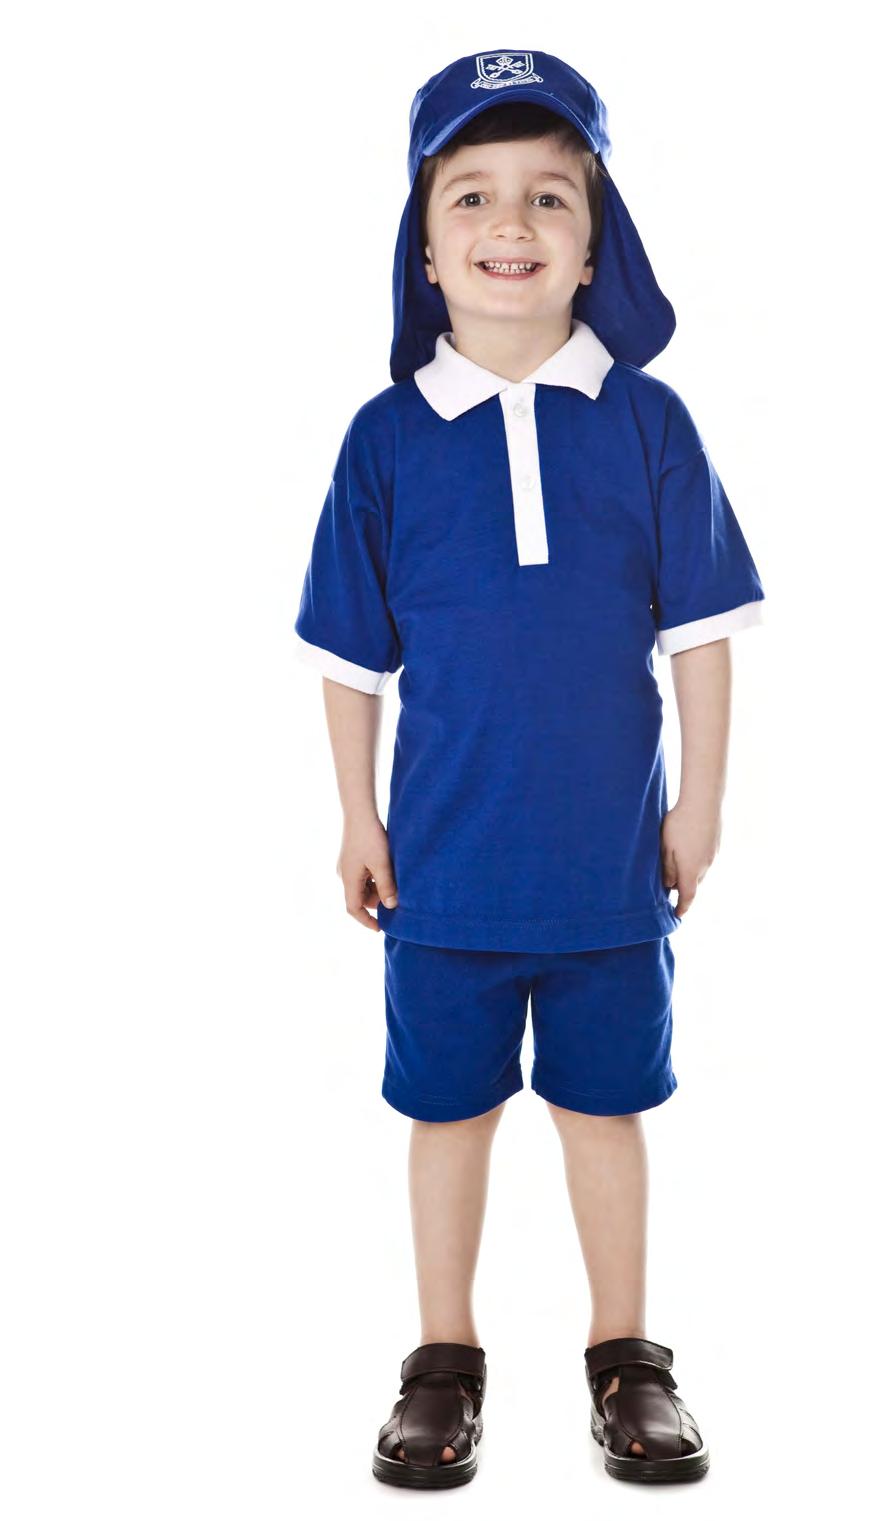 Early Learning Centre Summer Uniform Early Learning Centre Winter Uniform Boys wear short sleeve polo shirt royal blue with white collar and trim. Boys wear royal blue shorts with a drawstring waist.